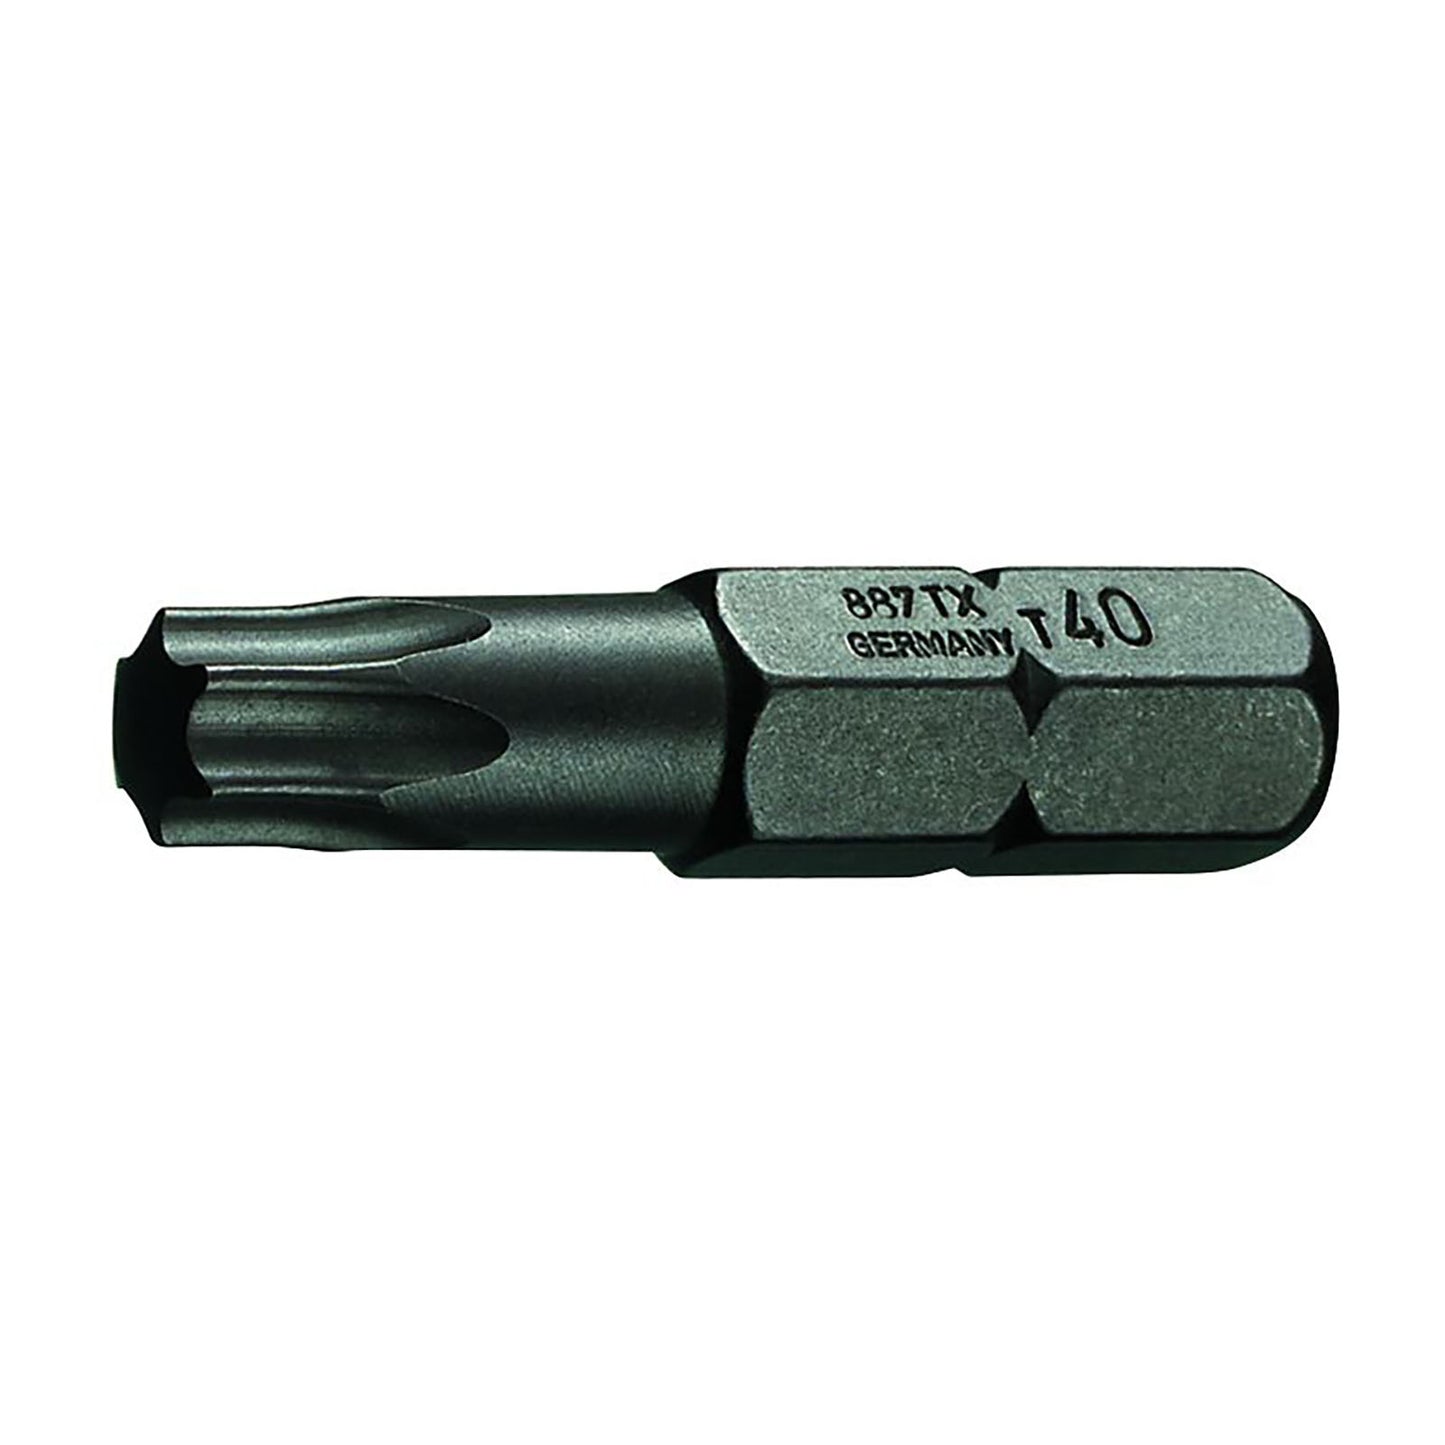 GEDORE 687 TX T30 S-010 - Embout TORX® 1/4", T30 (6542800)